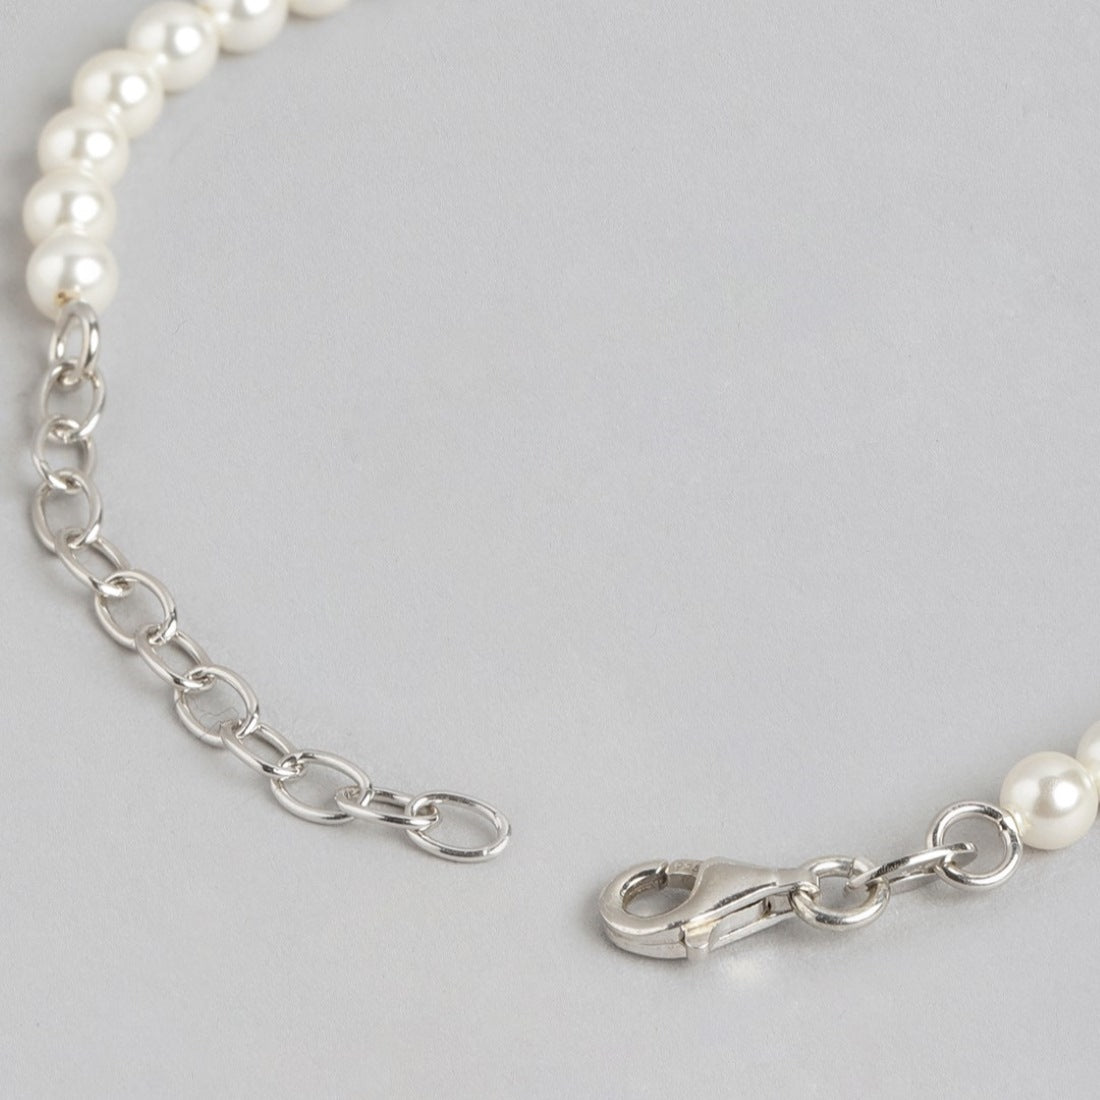 Pearlescent Opulence Rhodium-Plated 925 Sterling Silver Bracelet